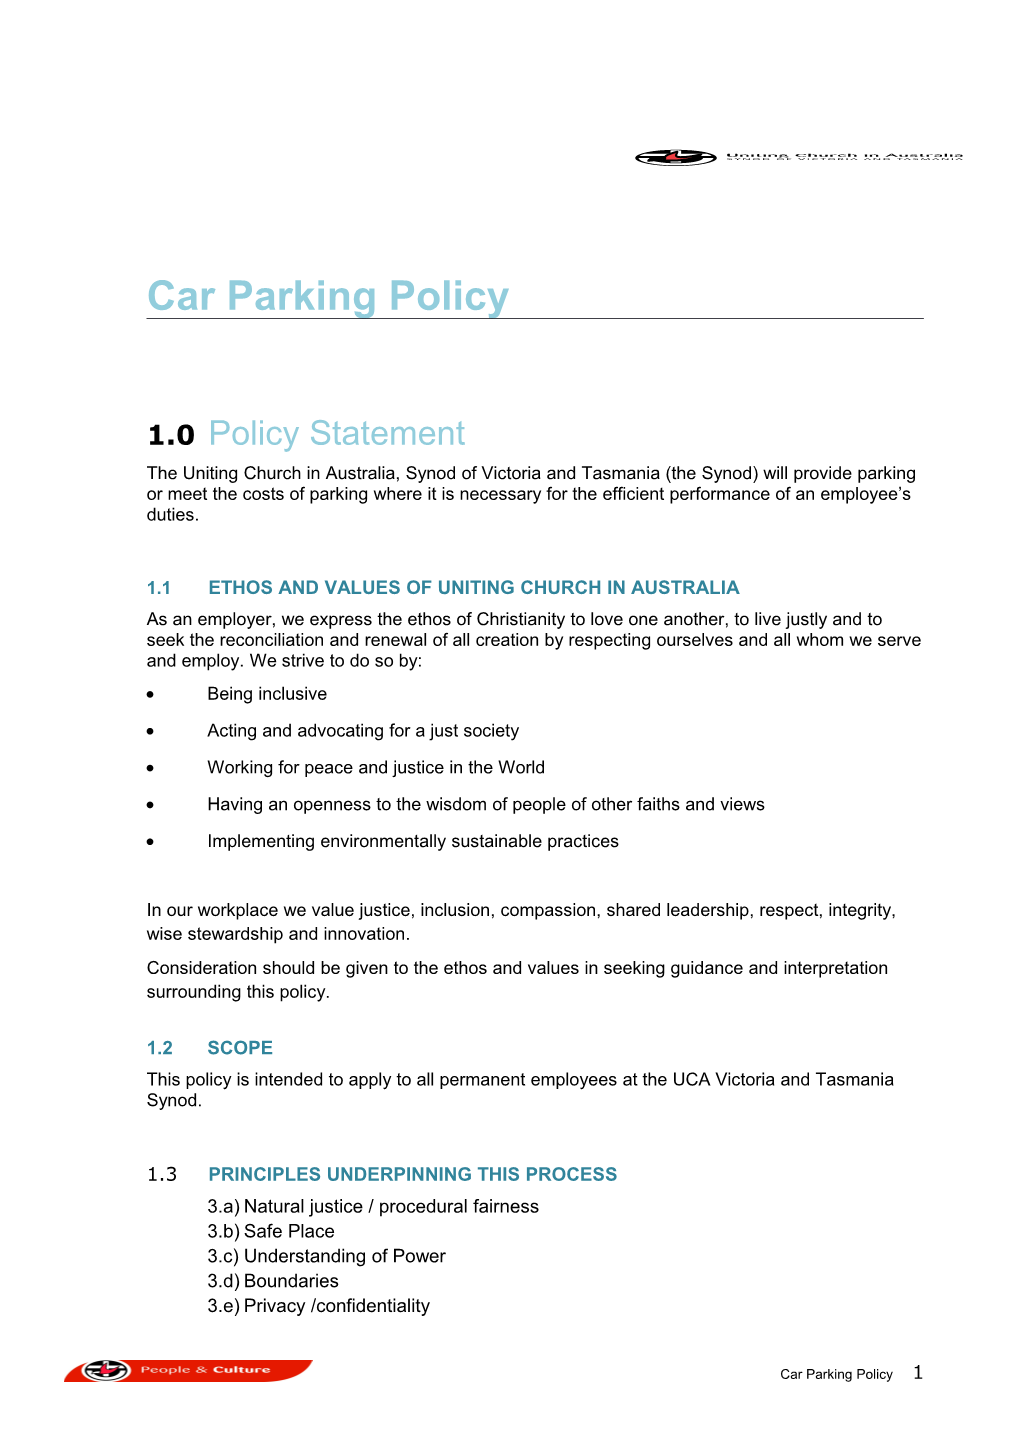 Car Parking Policy